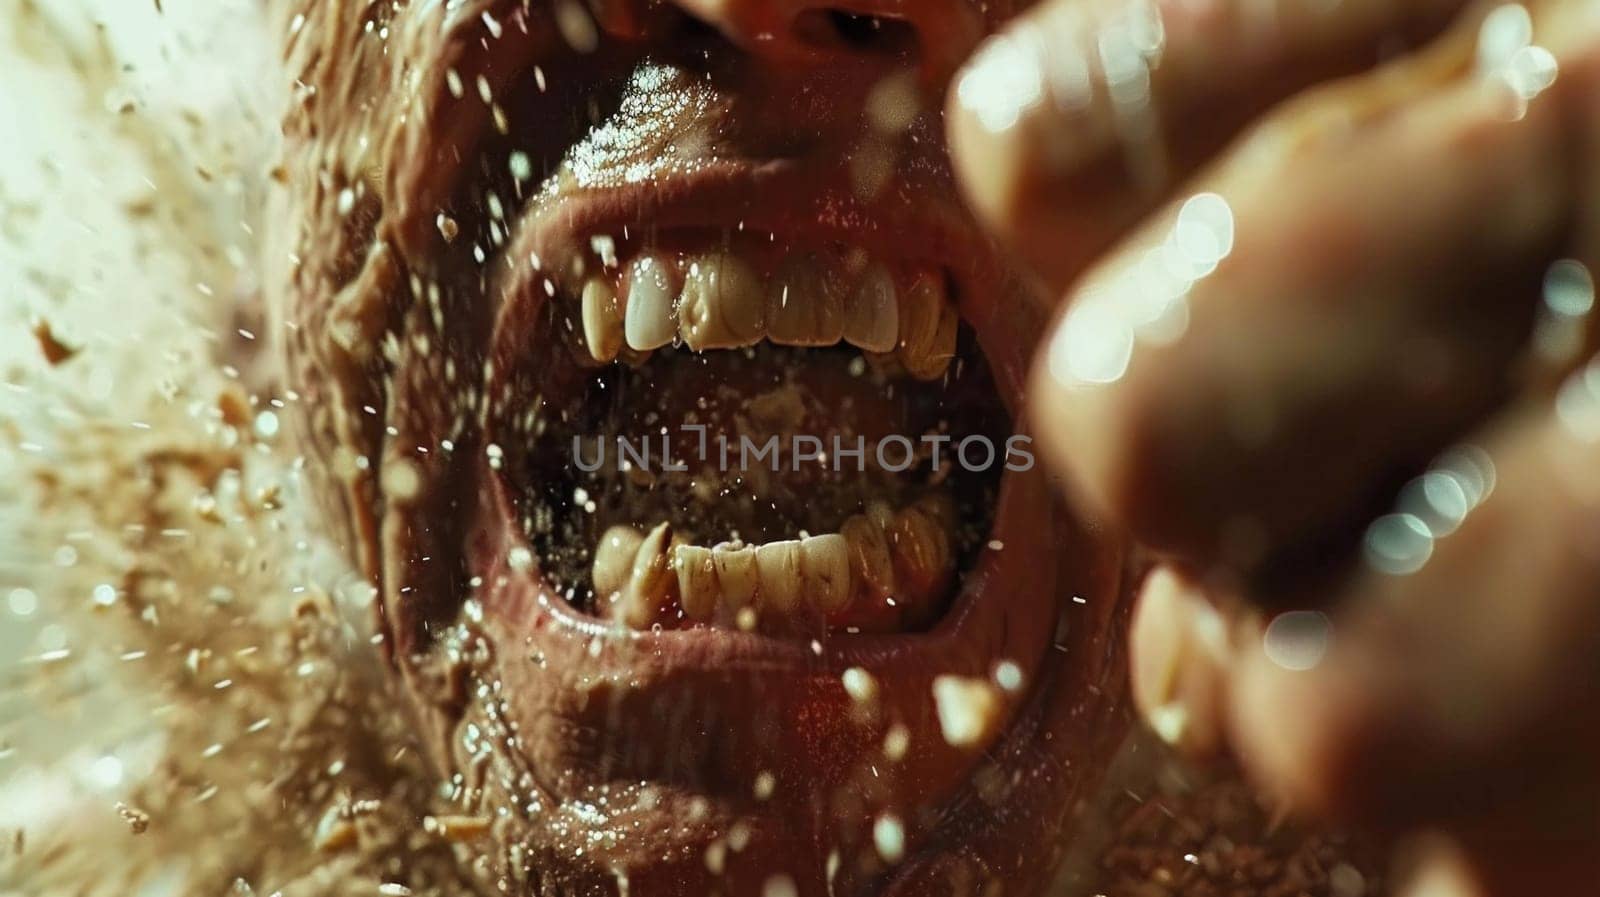 Detailed close-up view of a persons mouth showing broken teeth and part of a fist in the frame.